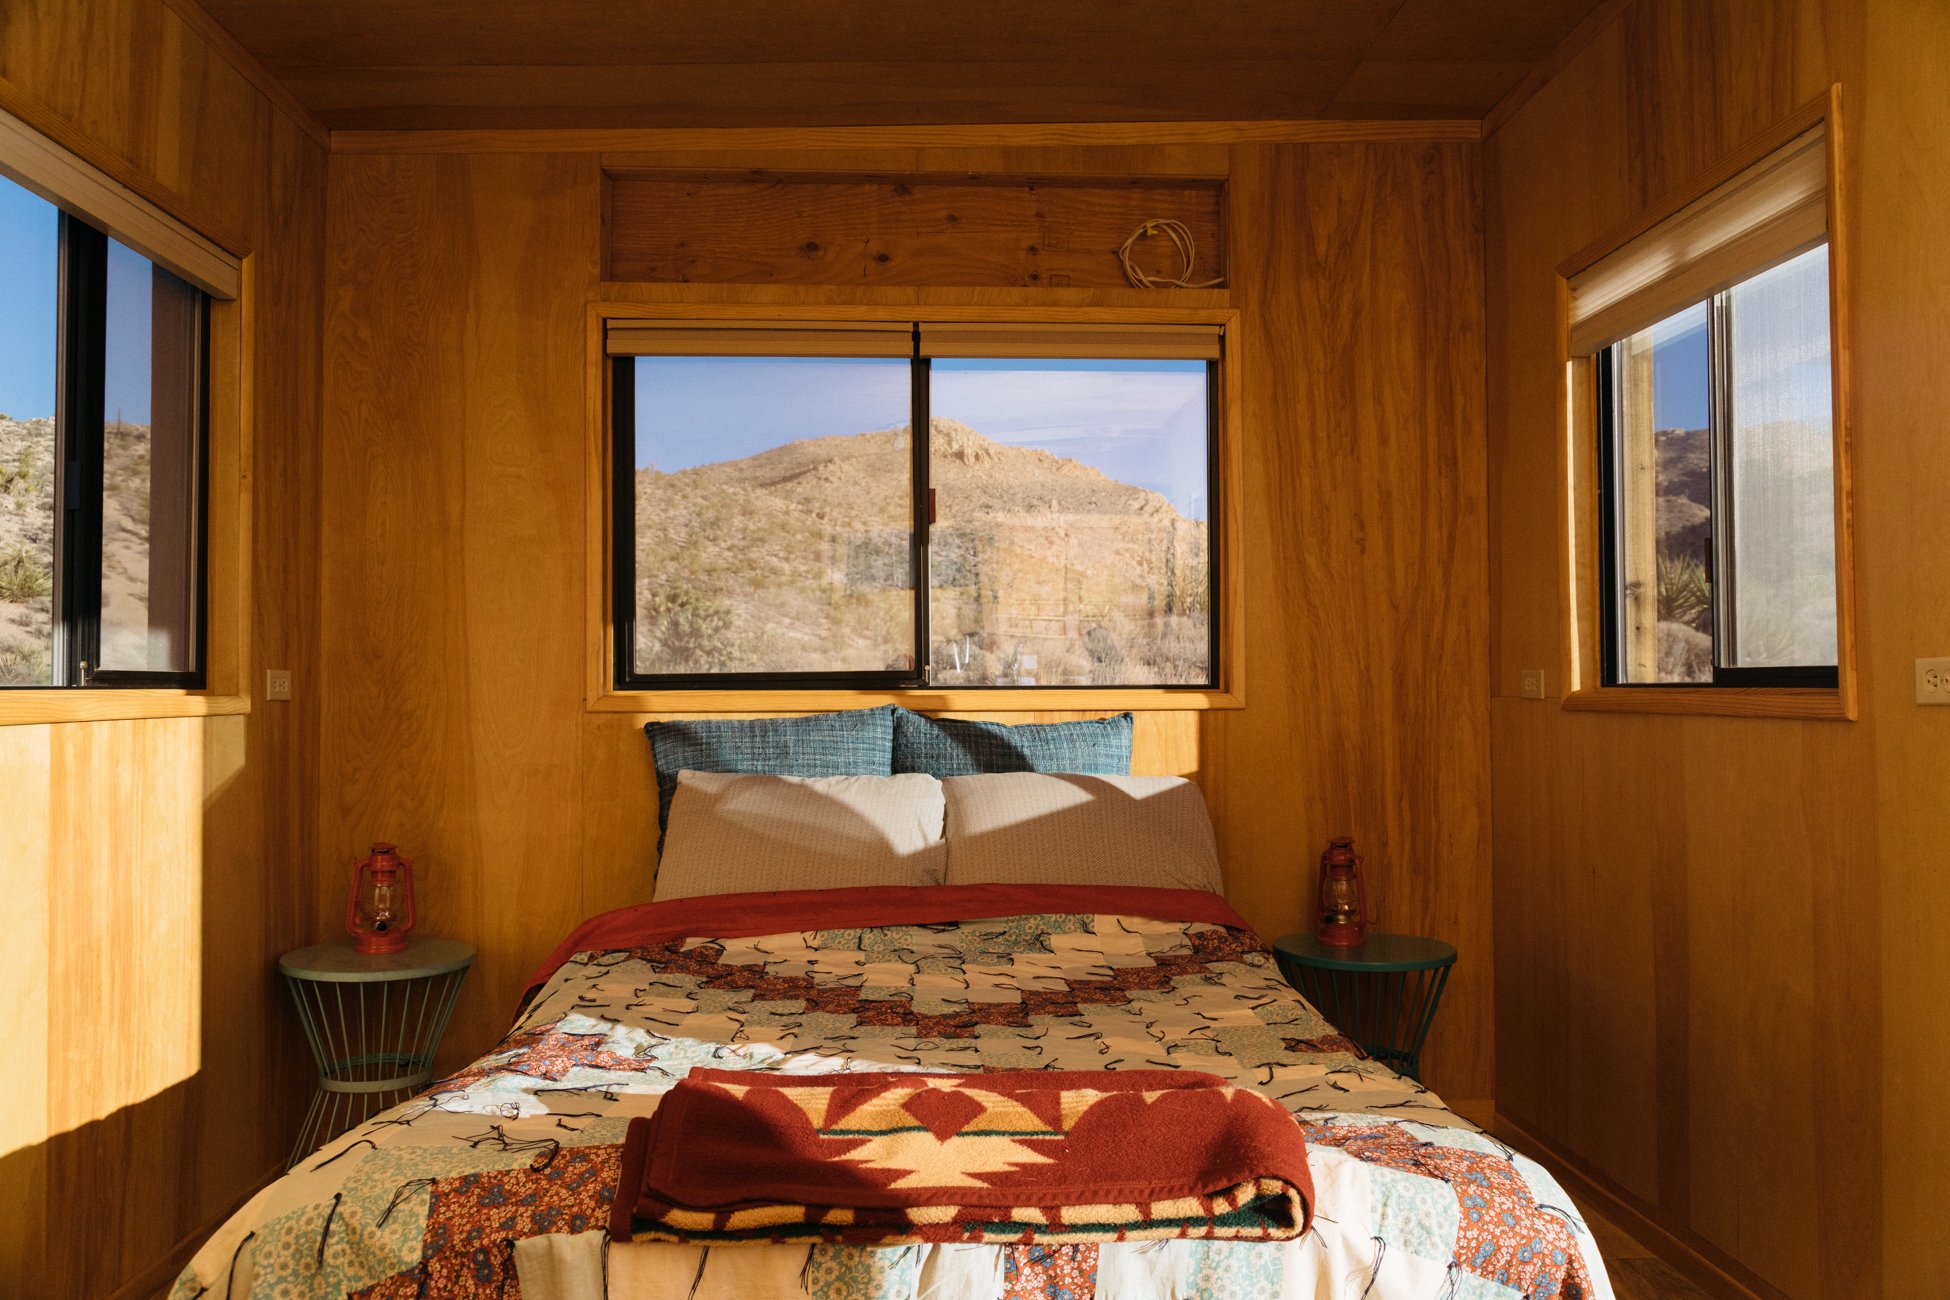  The Camera Obscura House has become a cozy guest house for visitors to the ranch. Photo by Mikayla Whitmore.  